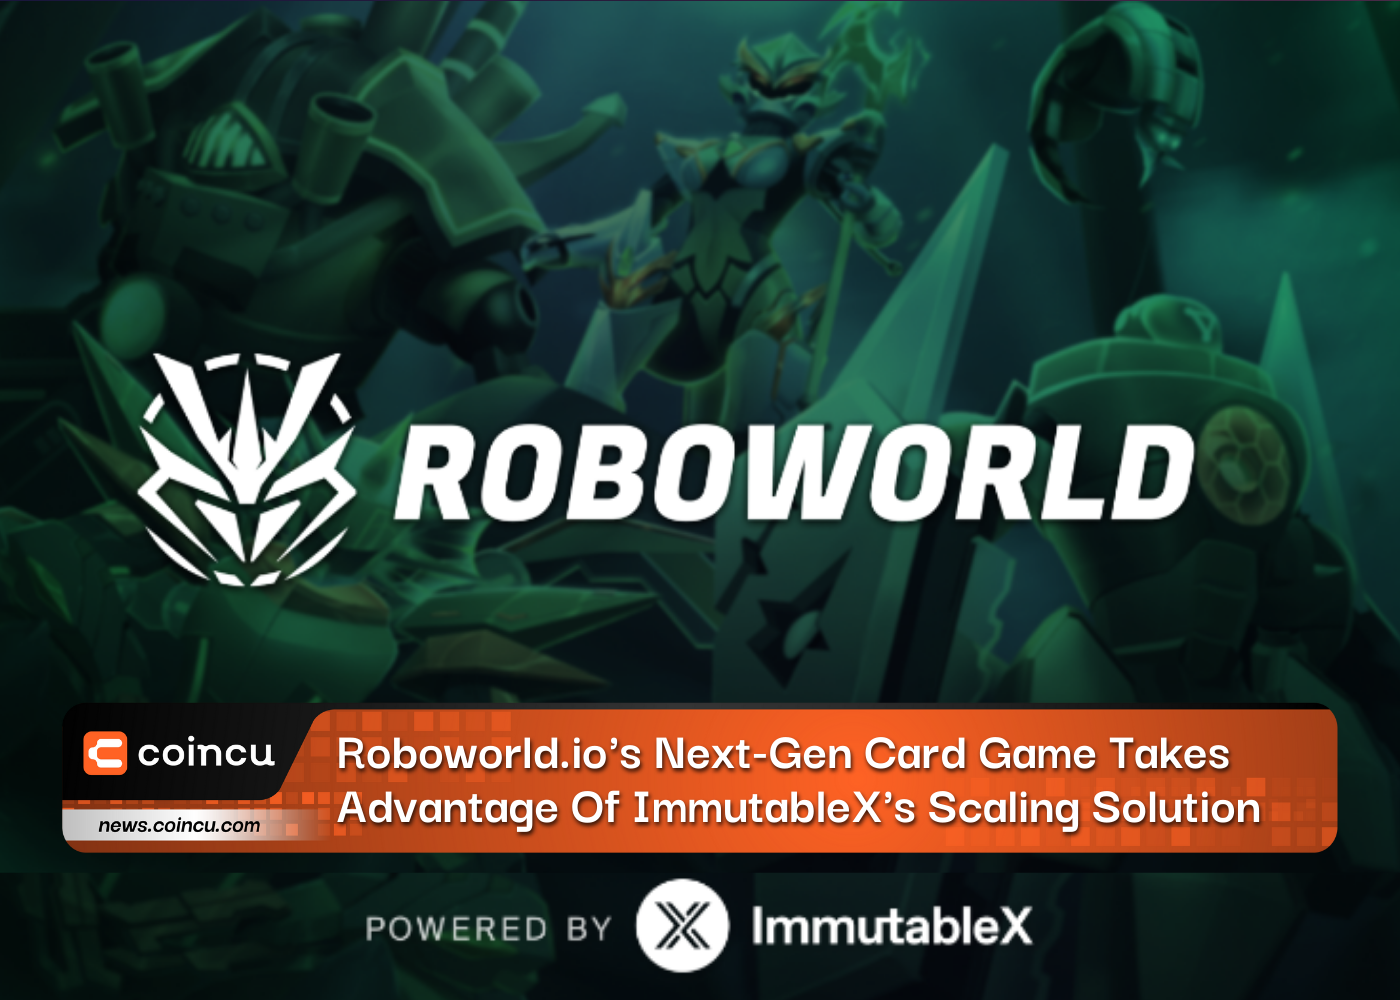 Roboworld.io's Next-Gen Card Game Takes Advantage Of ImmutableX's Scaling Solution